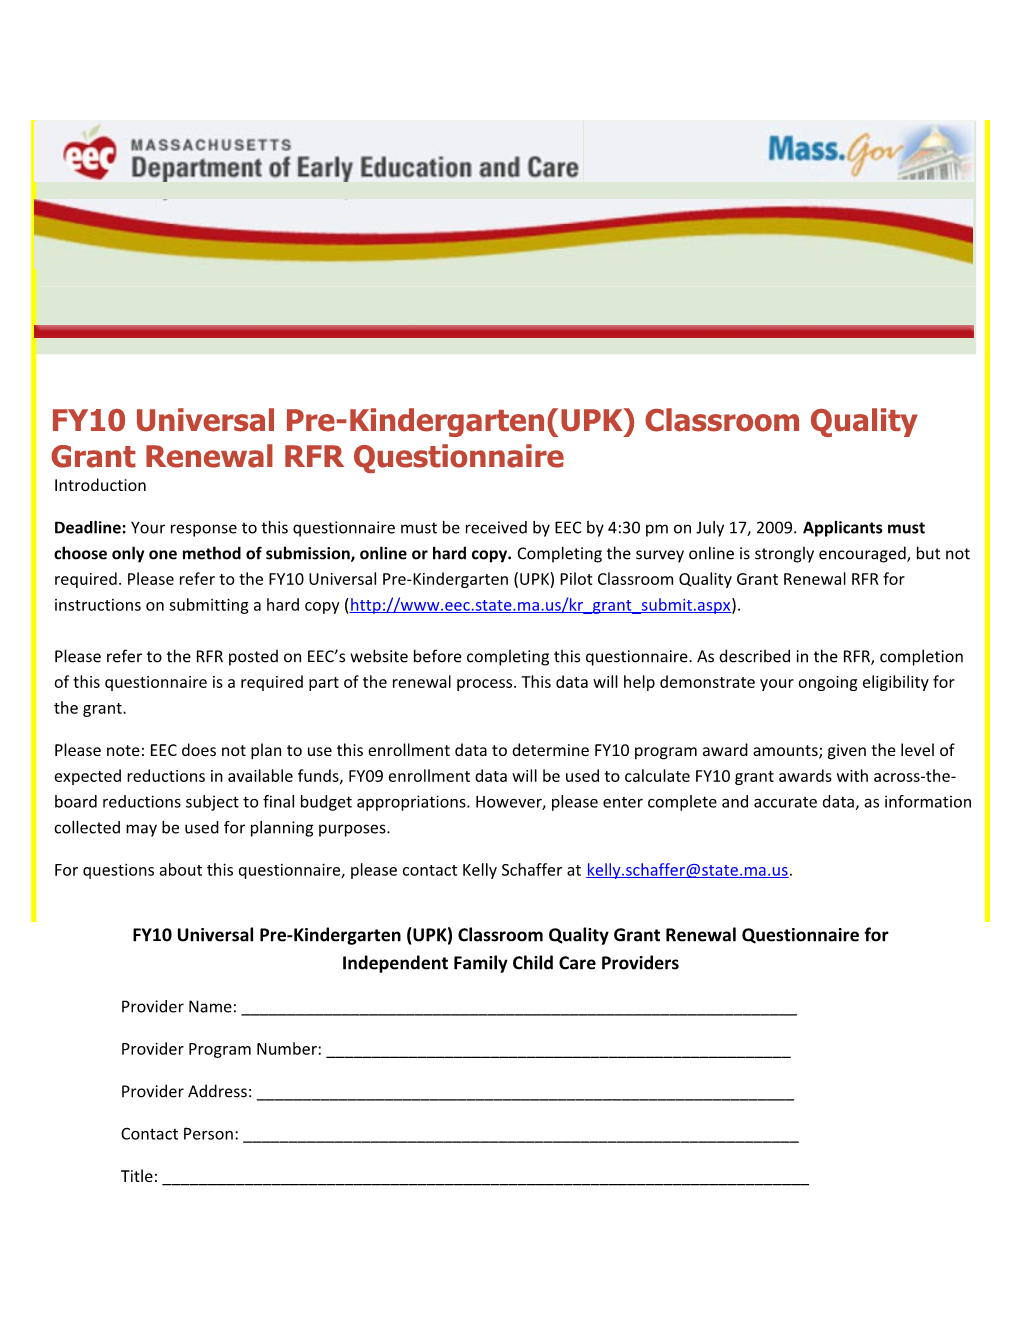 FY10 Universal Pre-Kindergarten (UPK) Classroom Quality Grant Renewal Questionnaire For